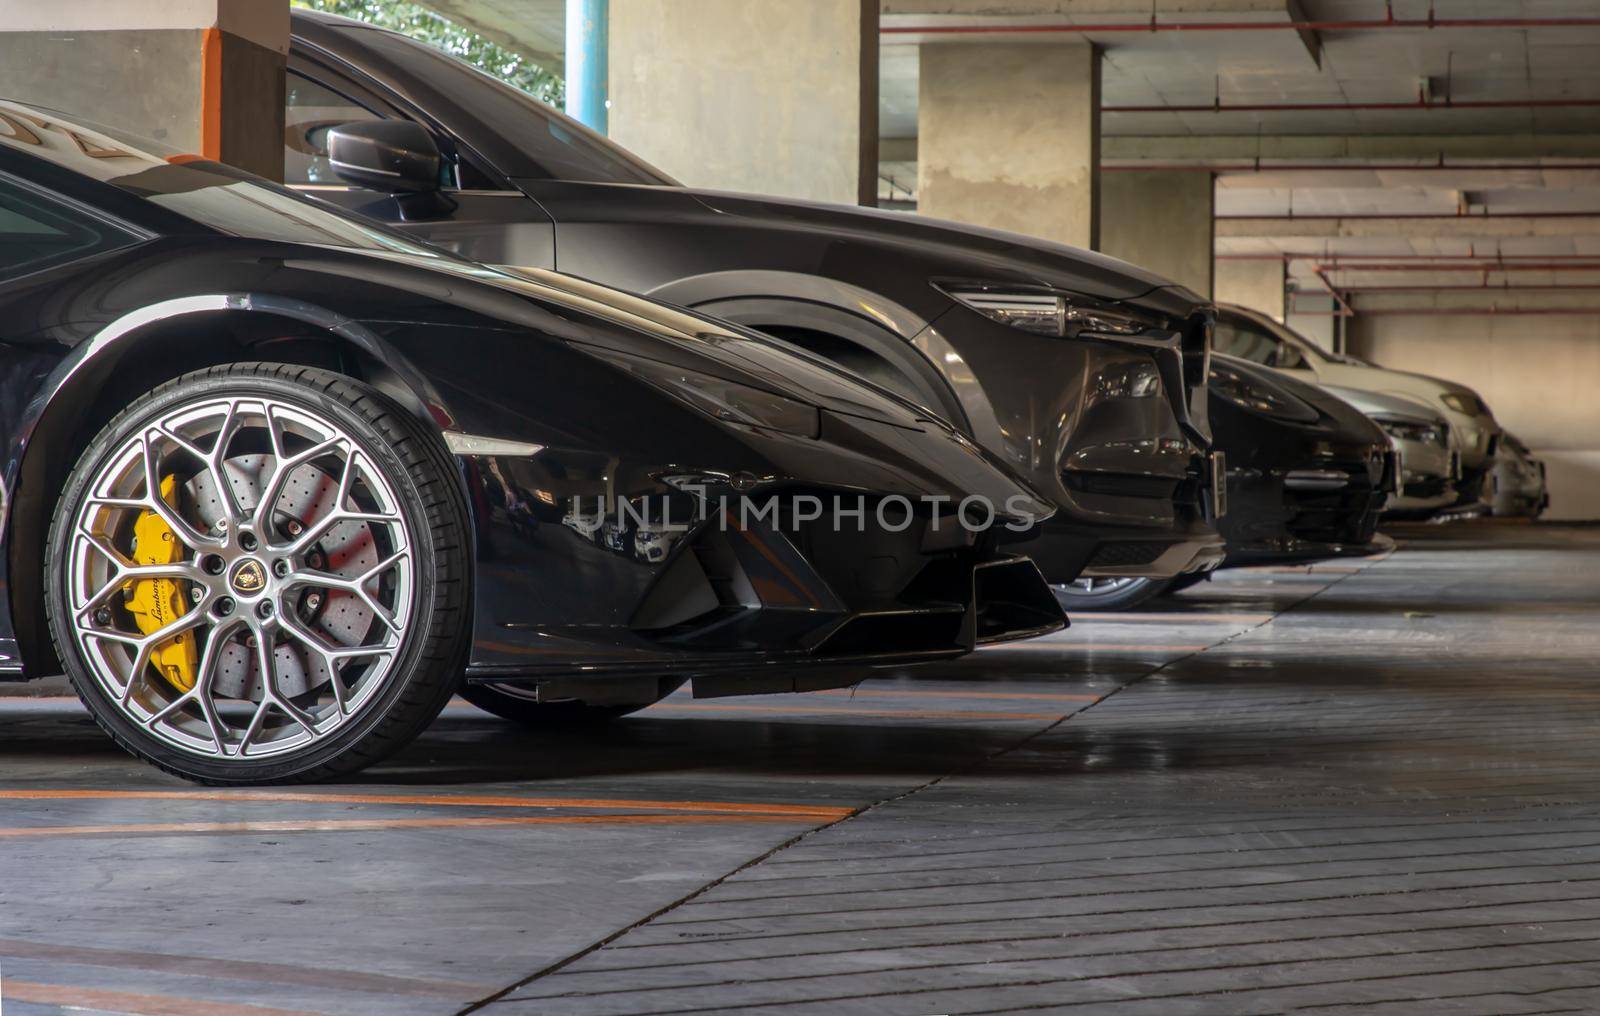 Bangkok, Thailand - 06 Jan 2021 : The side of Wheel of Black Lamborghini Sports Car parked in the parking lot. Selective focus.